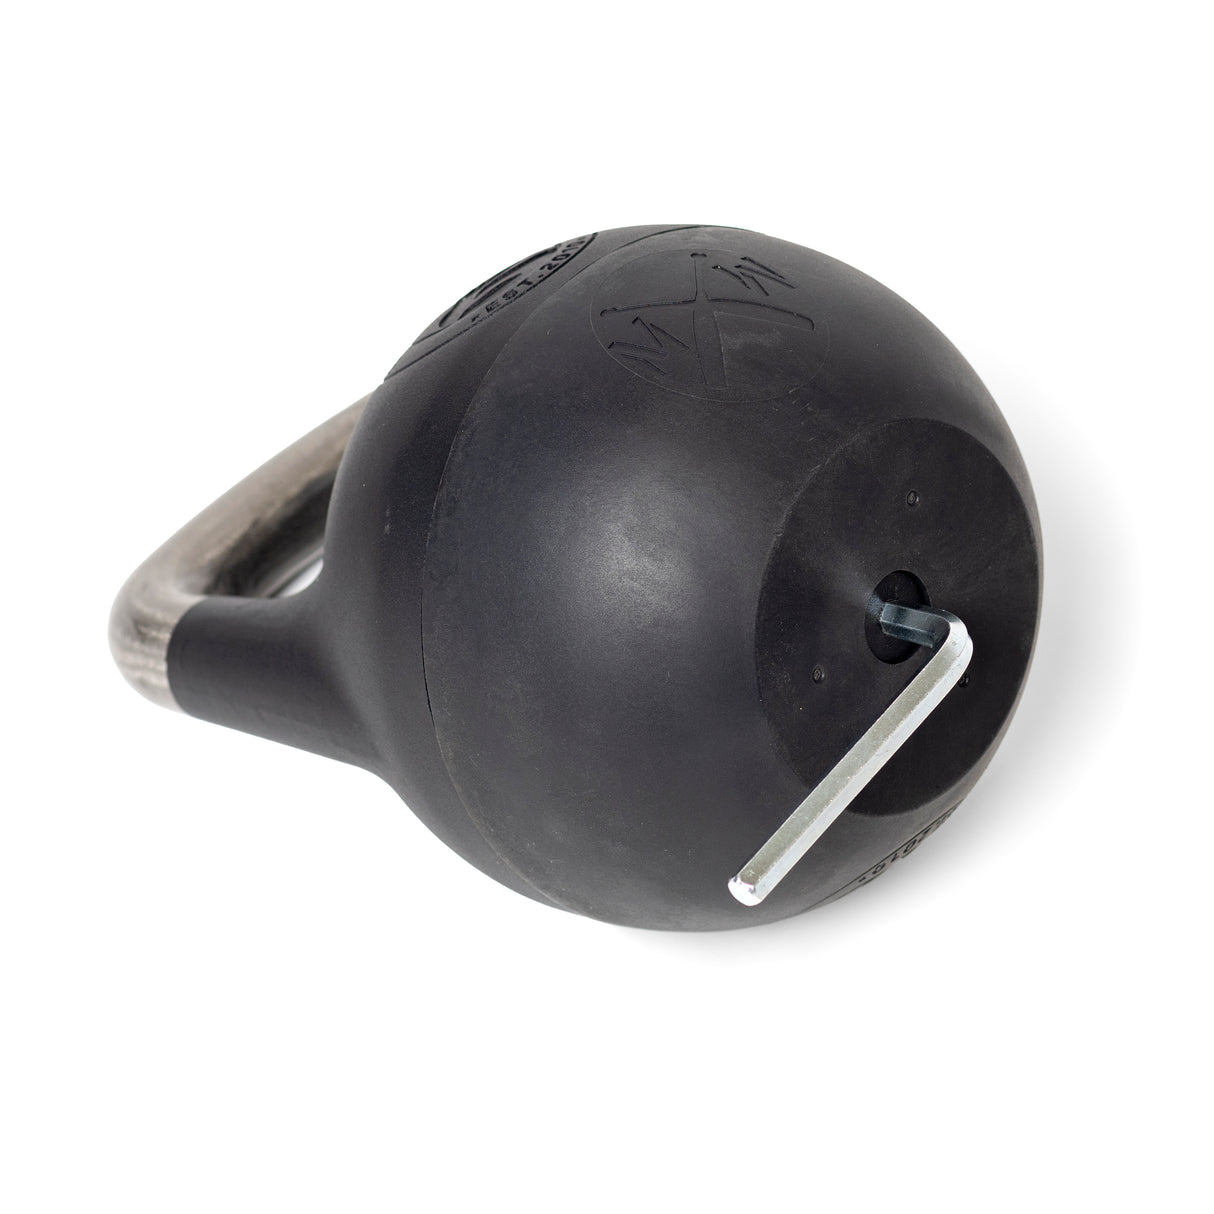 	close up picture of the Adjustable Kettlebell with a plastic bottom being removed by an allen wrench